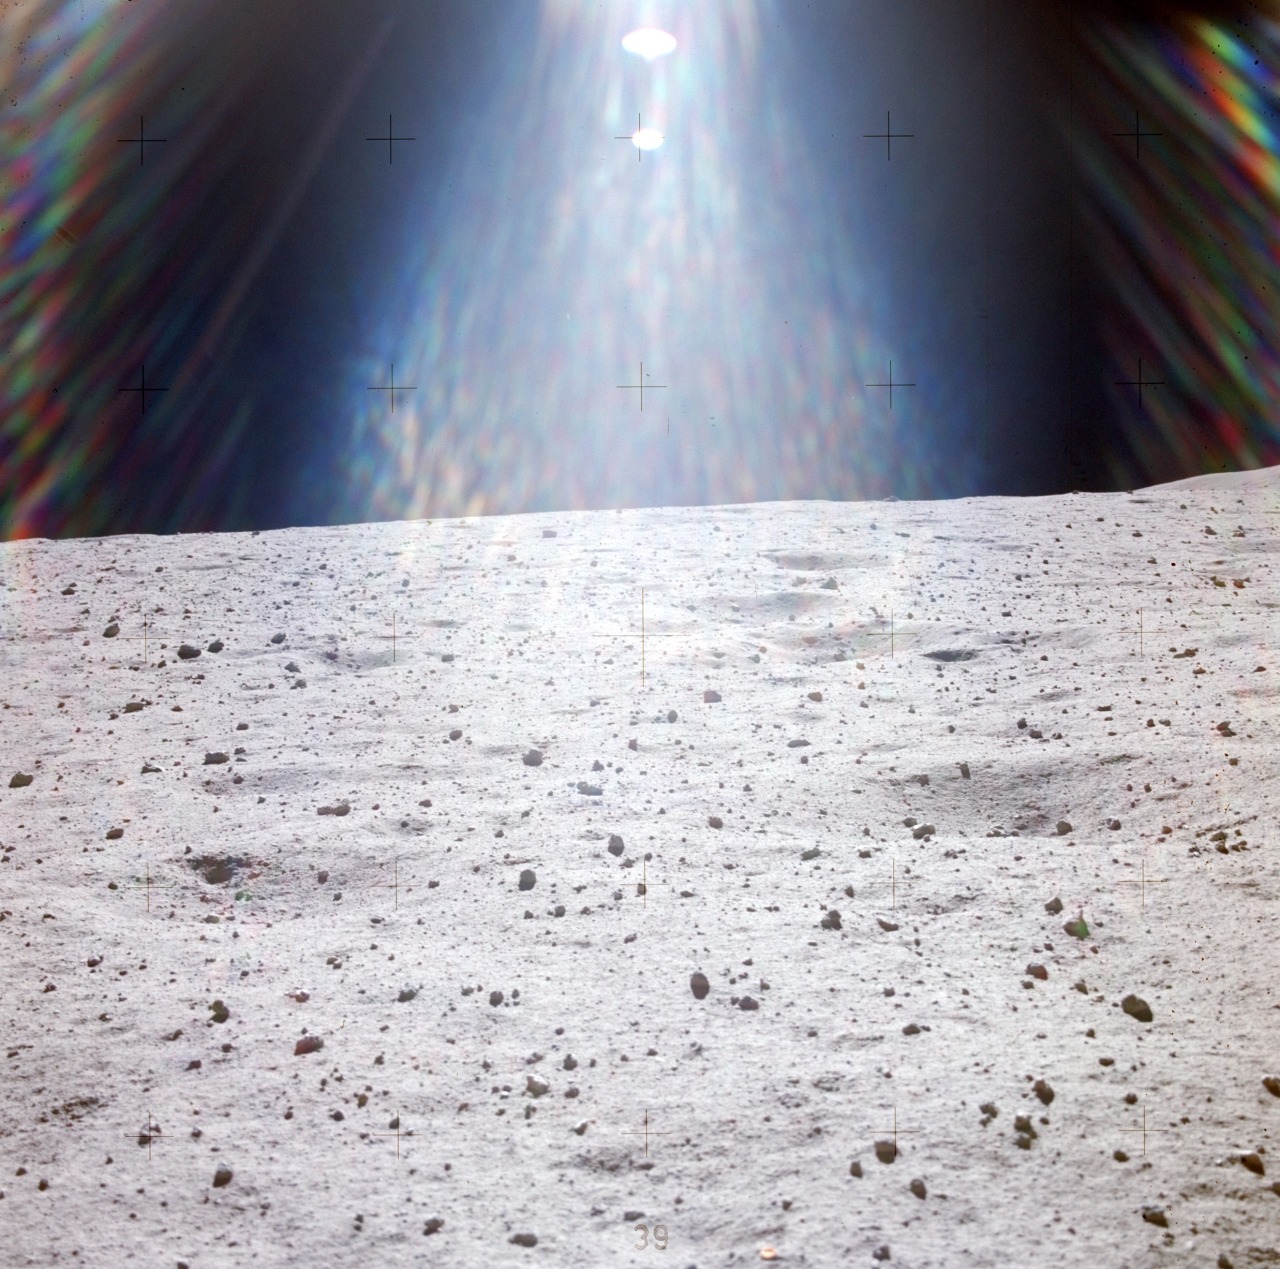 humanoidhistory:
“The Sun shining on the Moon, photographed during the Apollo 16 mission, April 1972.
”